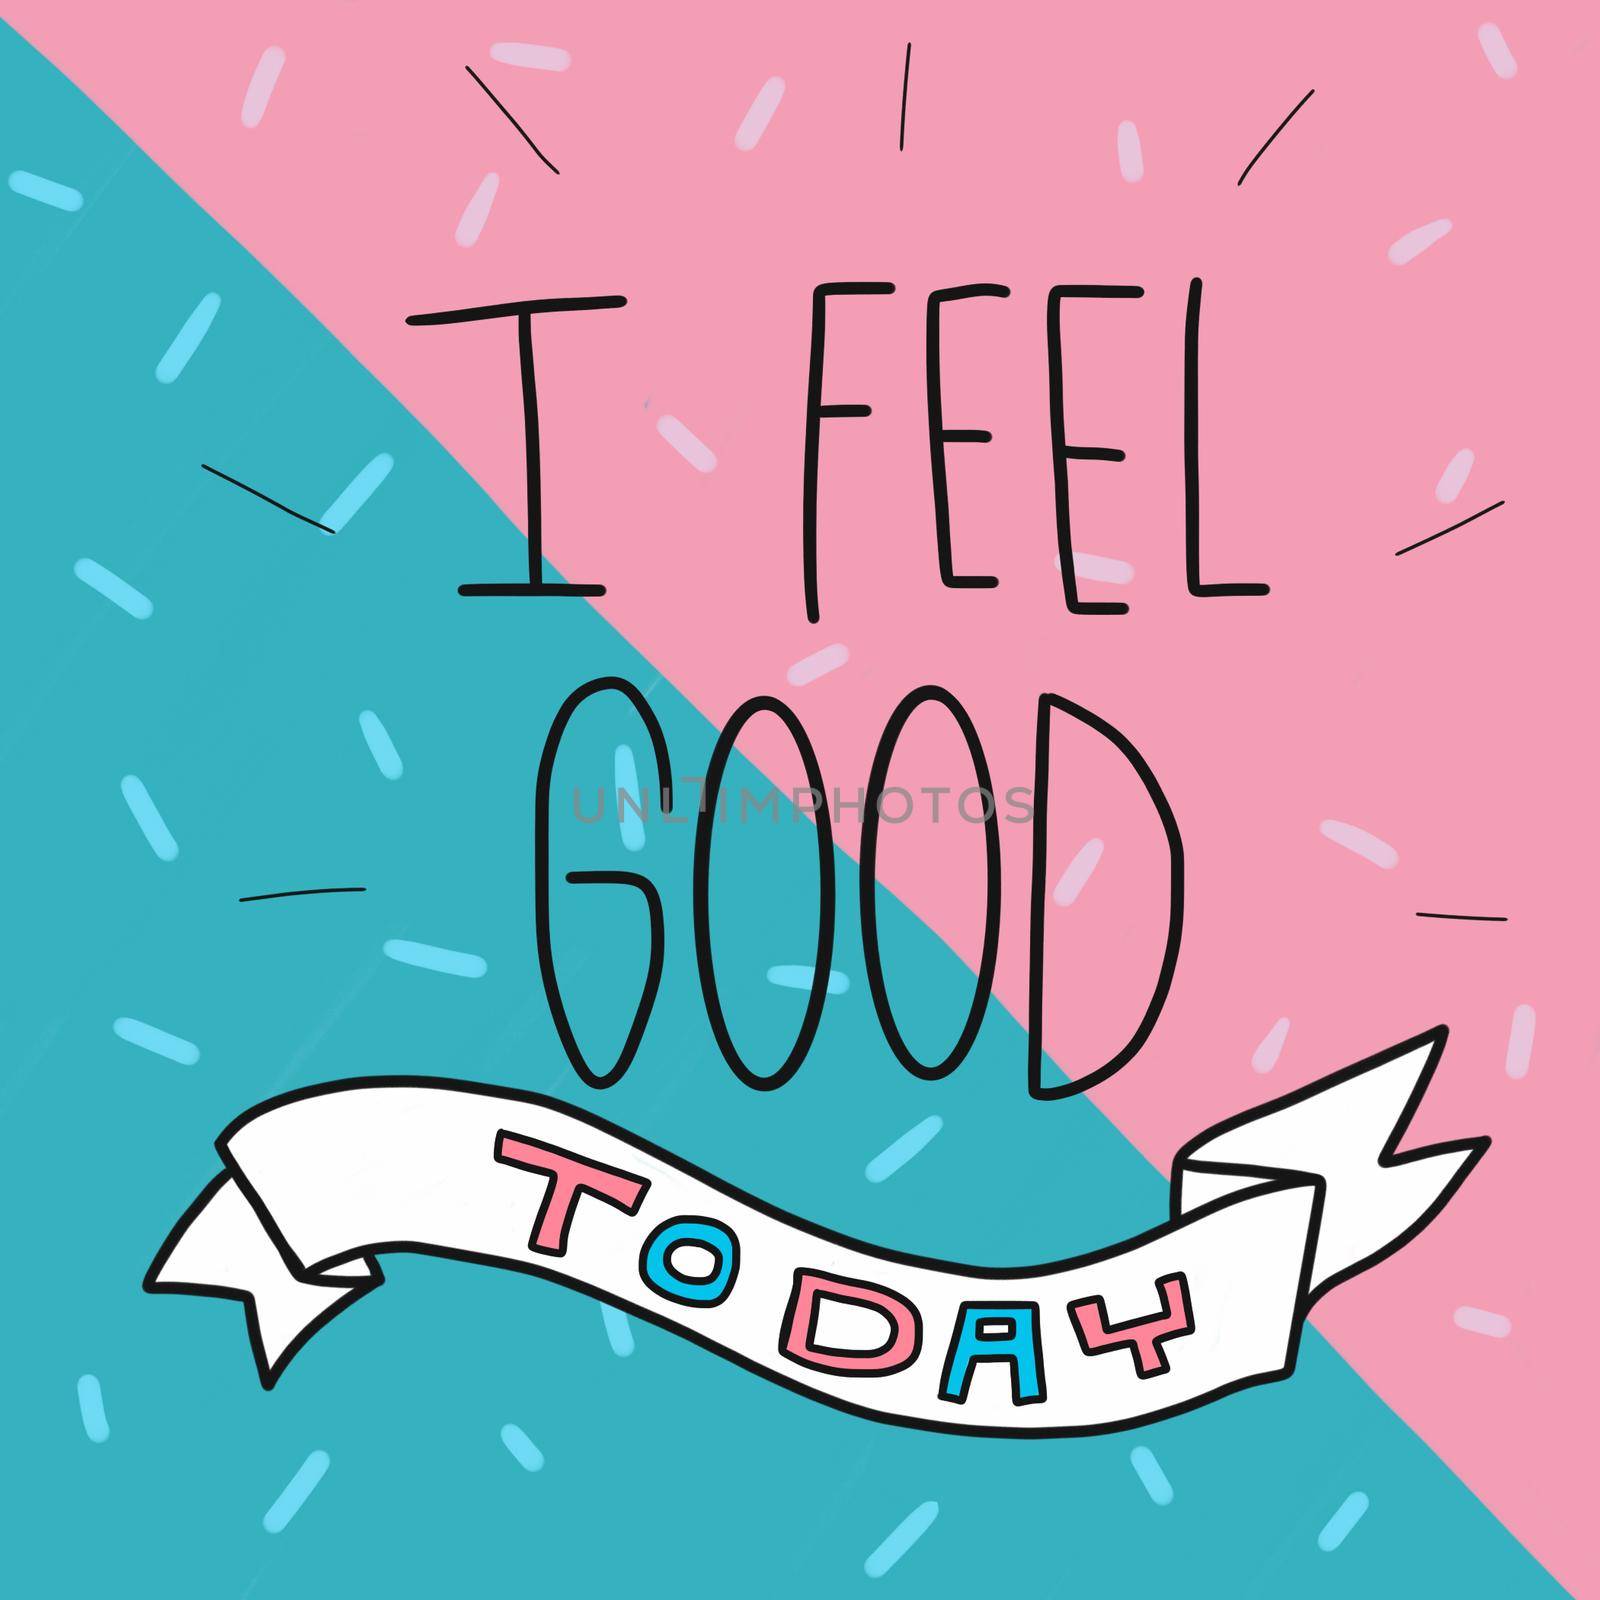 I feel good today word and cute pink and blue watercolor painting illustration by Yoopho